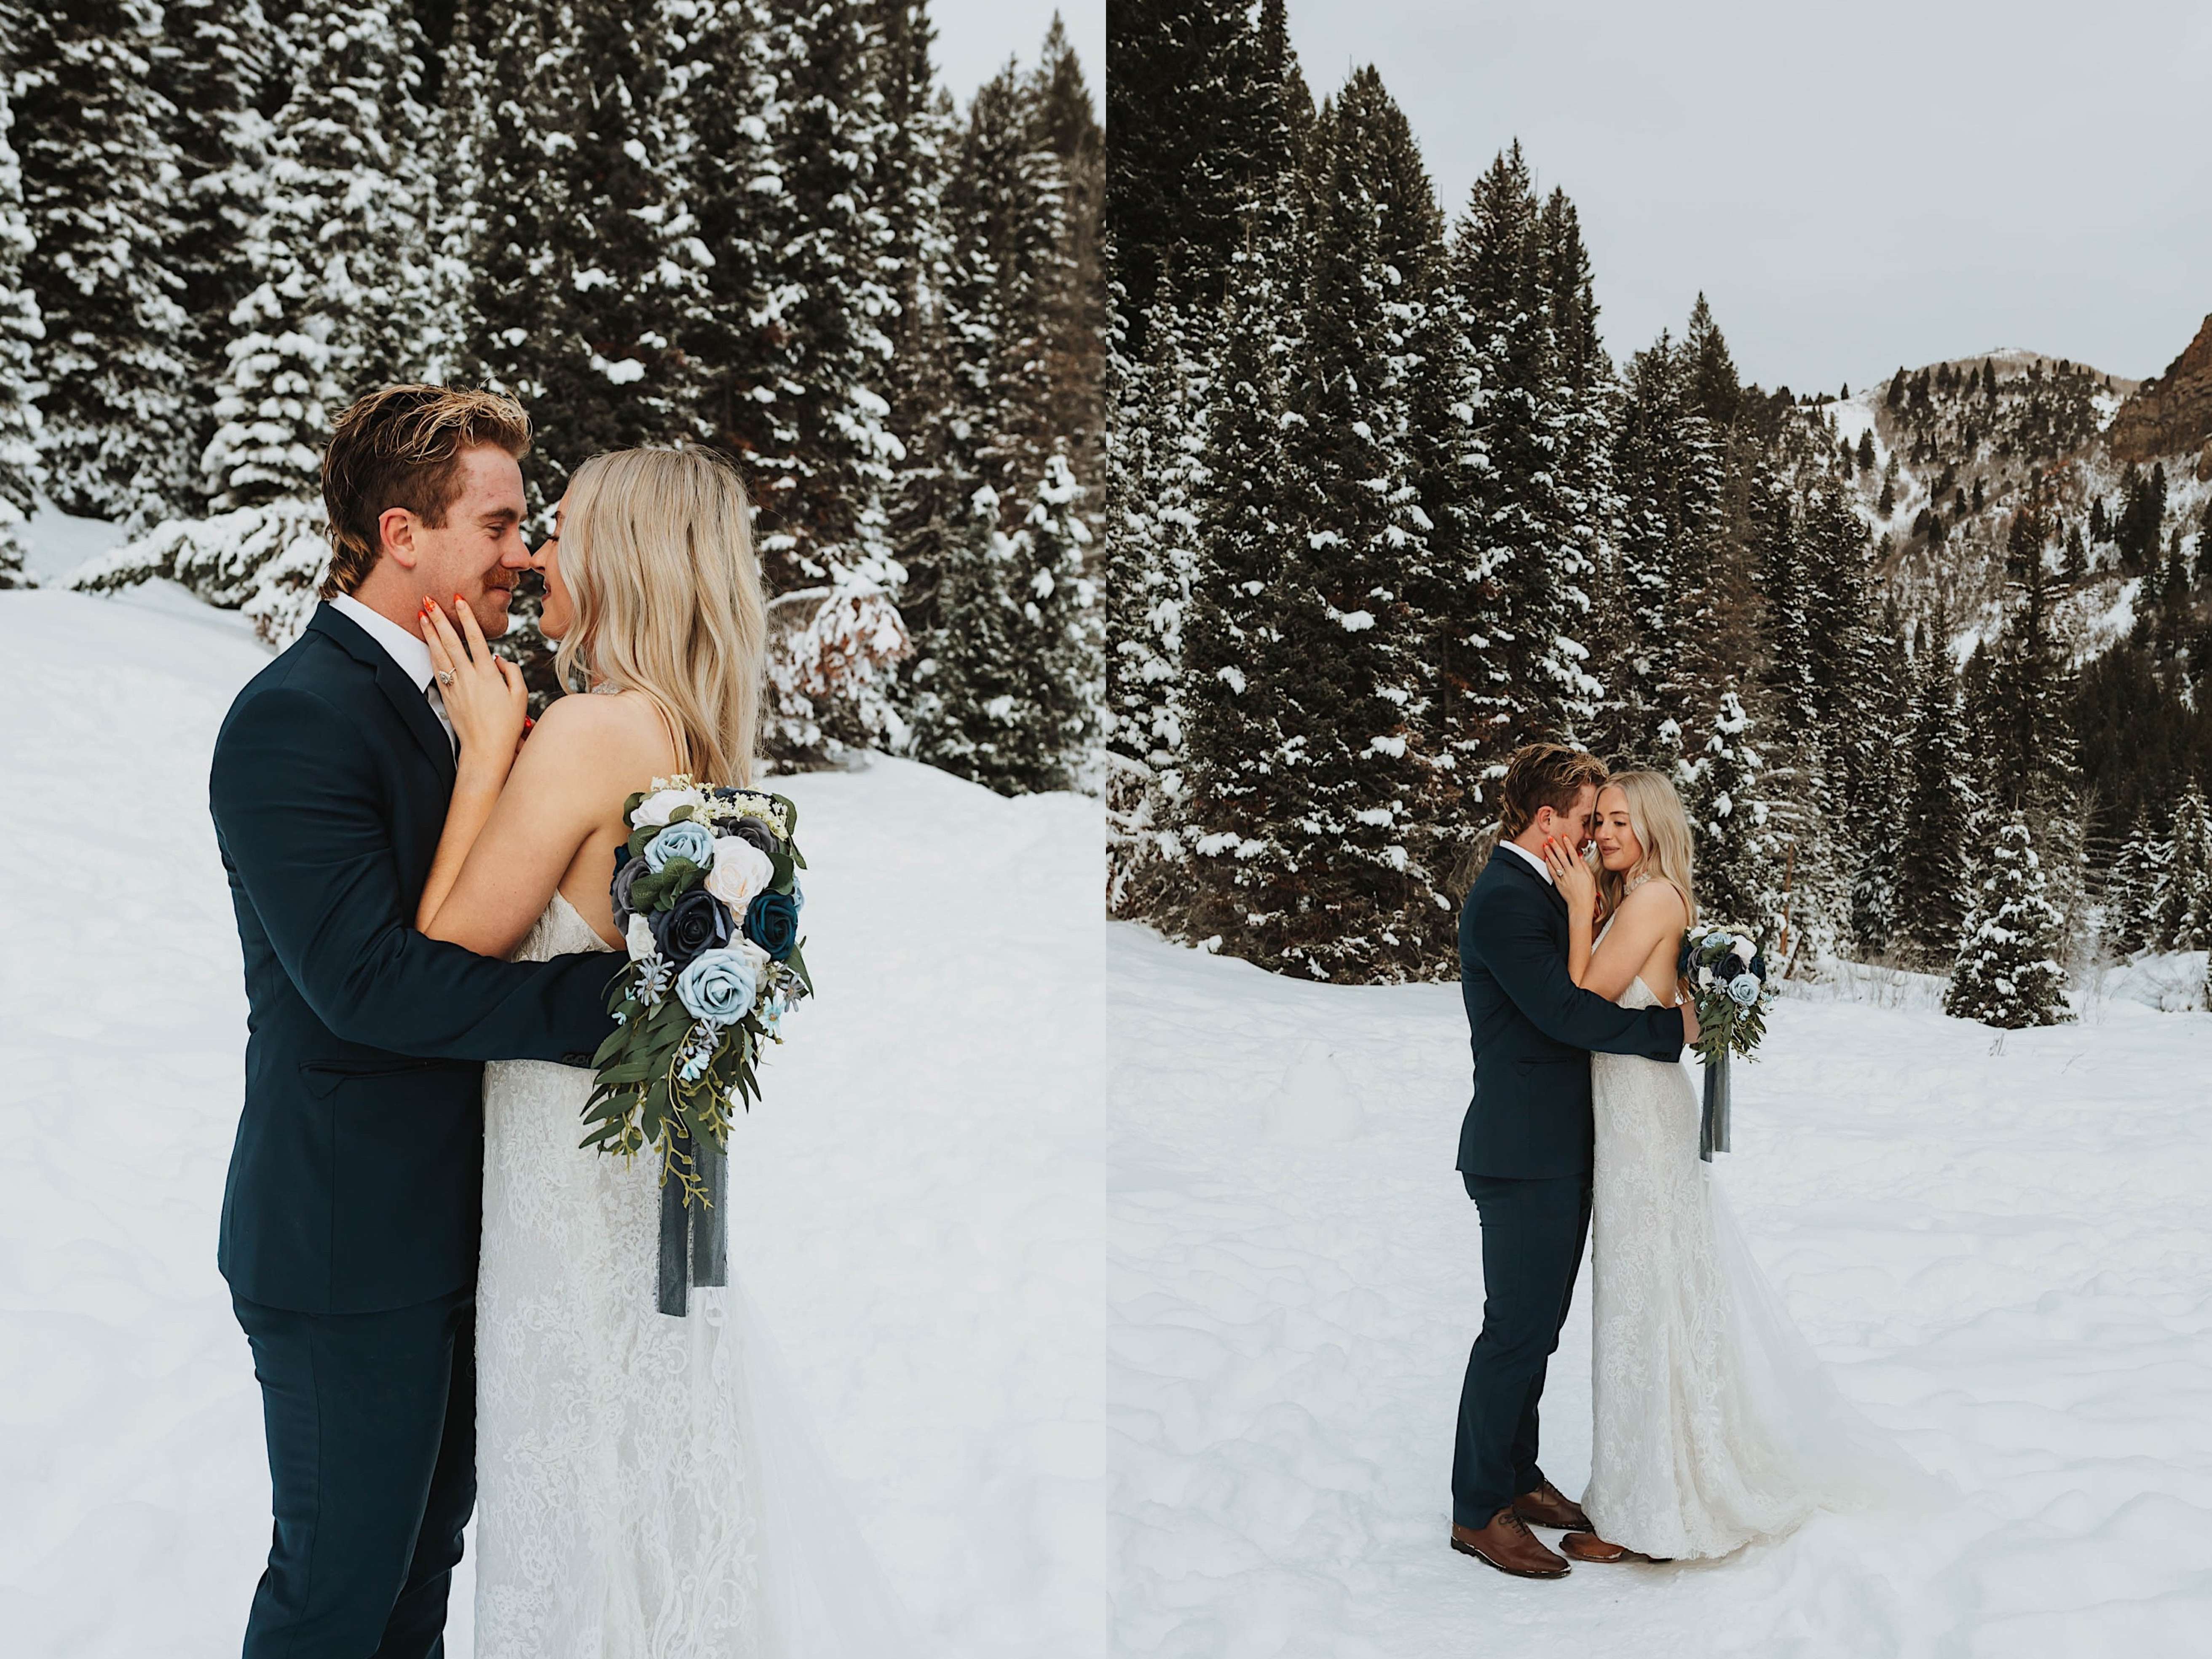 Two photos side by side of a bride and groom embracing one another and about to kiss in the snow, the left photo is a close up while the right photo shows more of the snow covered trees